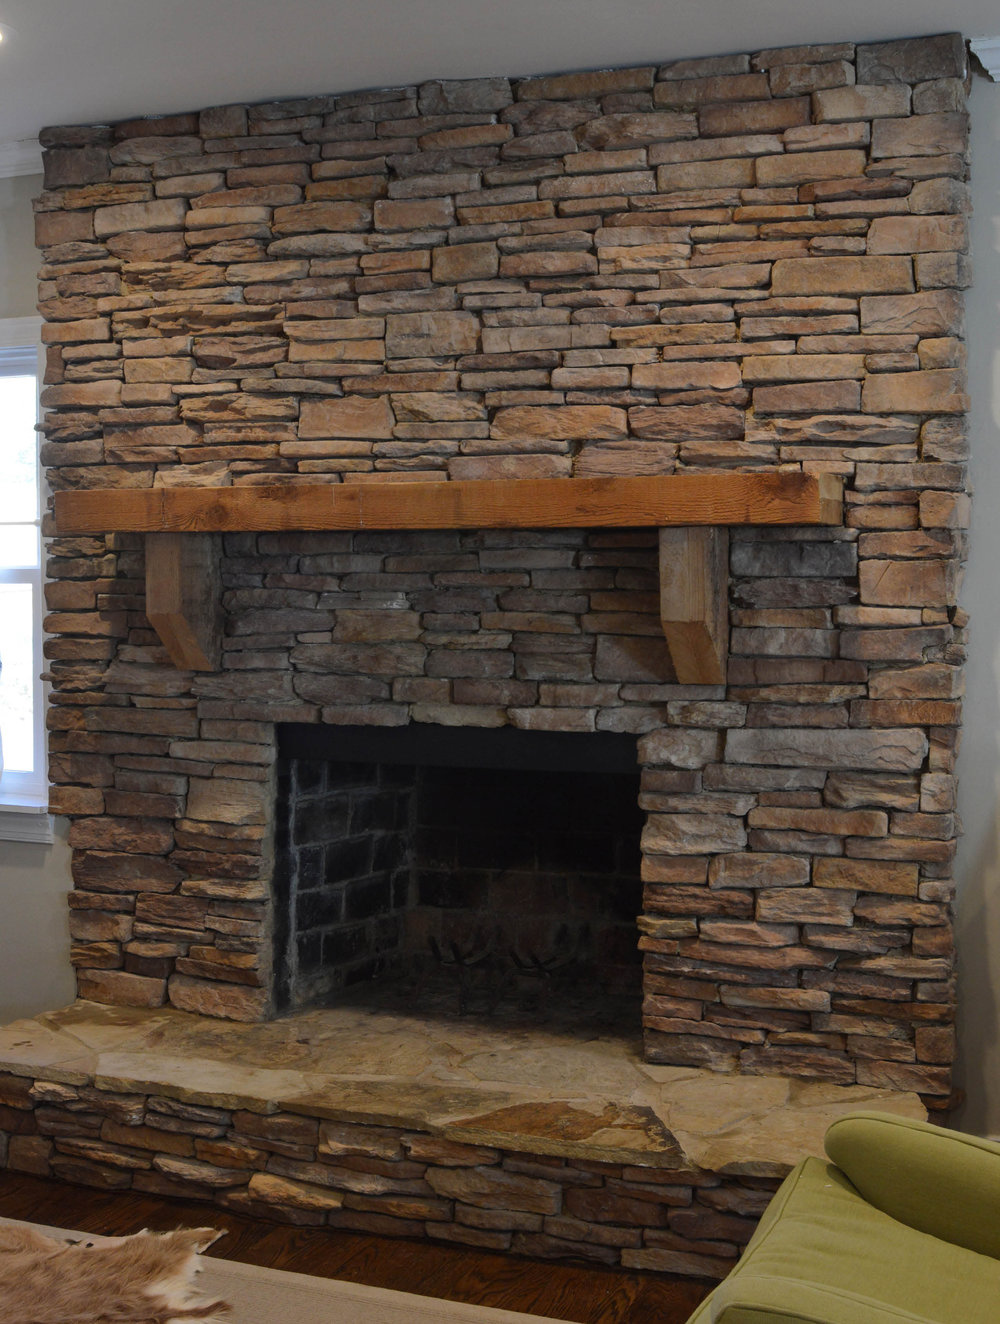 Where to Buy Fireplace Hearth Stone Inspirational before & after Our Fireplace Makeover — Hearth and Home